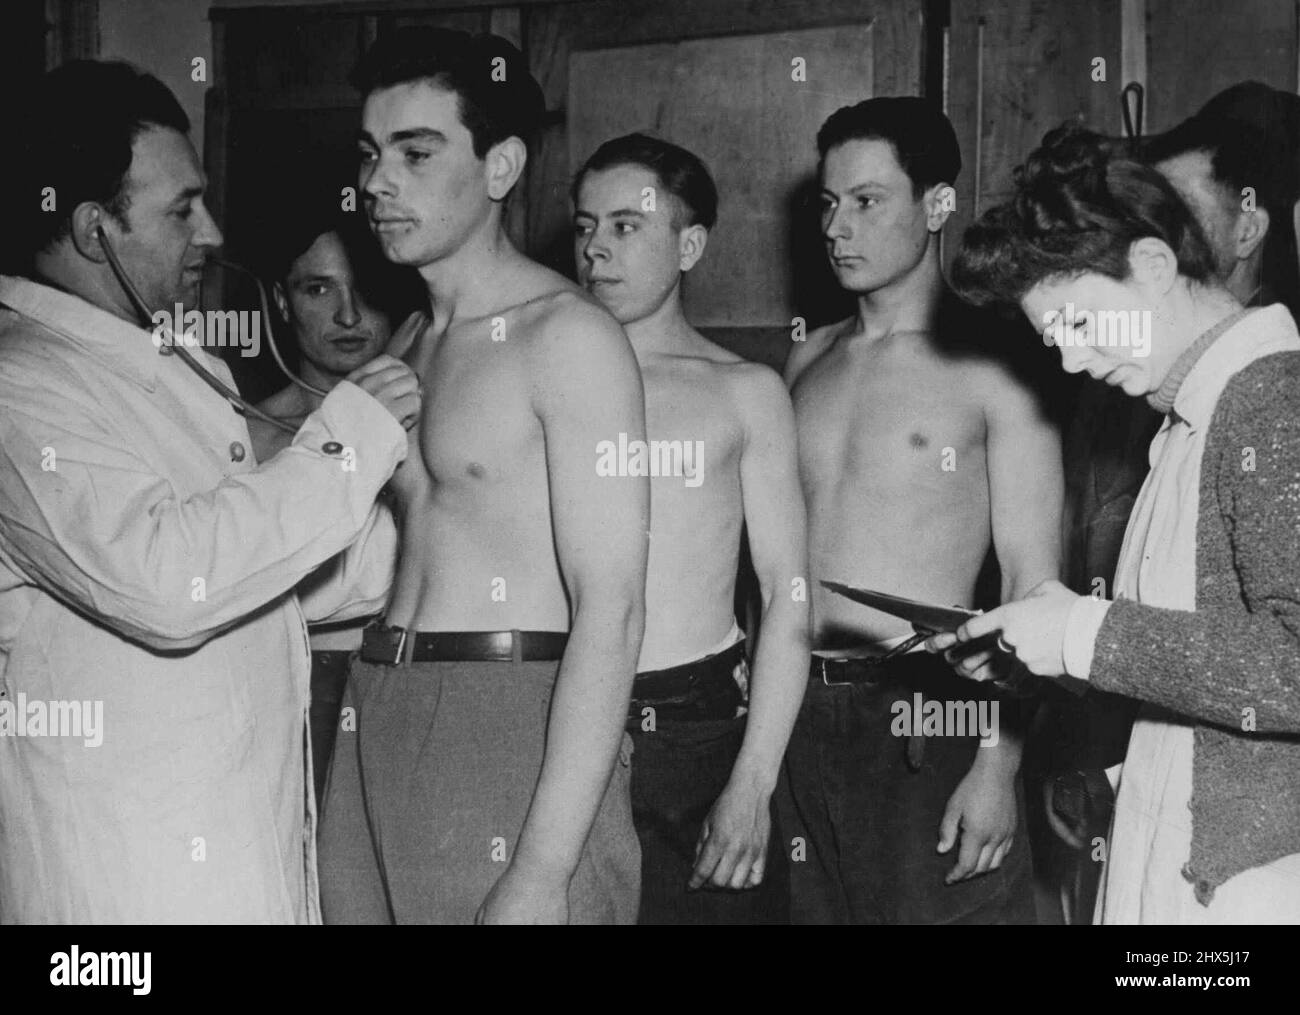 Liberated Russians Sheltered In Belgium -- Young Russians workers who had boon serving under the Nazi forced labor system receive a physical checkup from a Belgian doctor March 6, 1945, after being liberated from the Germans by Allied forces. They are under the care of the Belgian Government at an Allied displaced persons center at Namur, Belgium. April 23, 1945. (Photo by U.S. Signal Corps Photo). Stock Photo